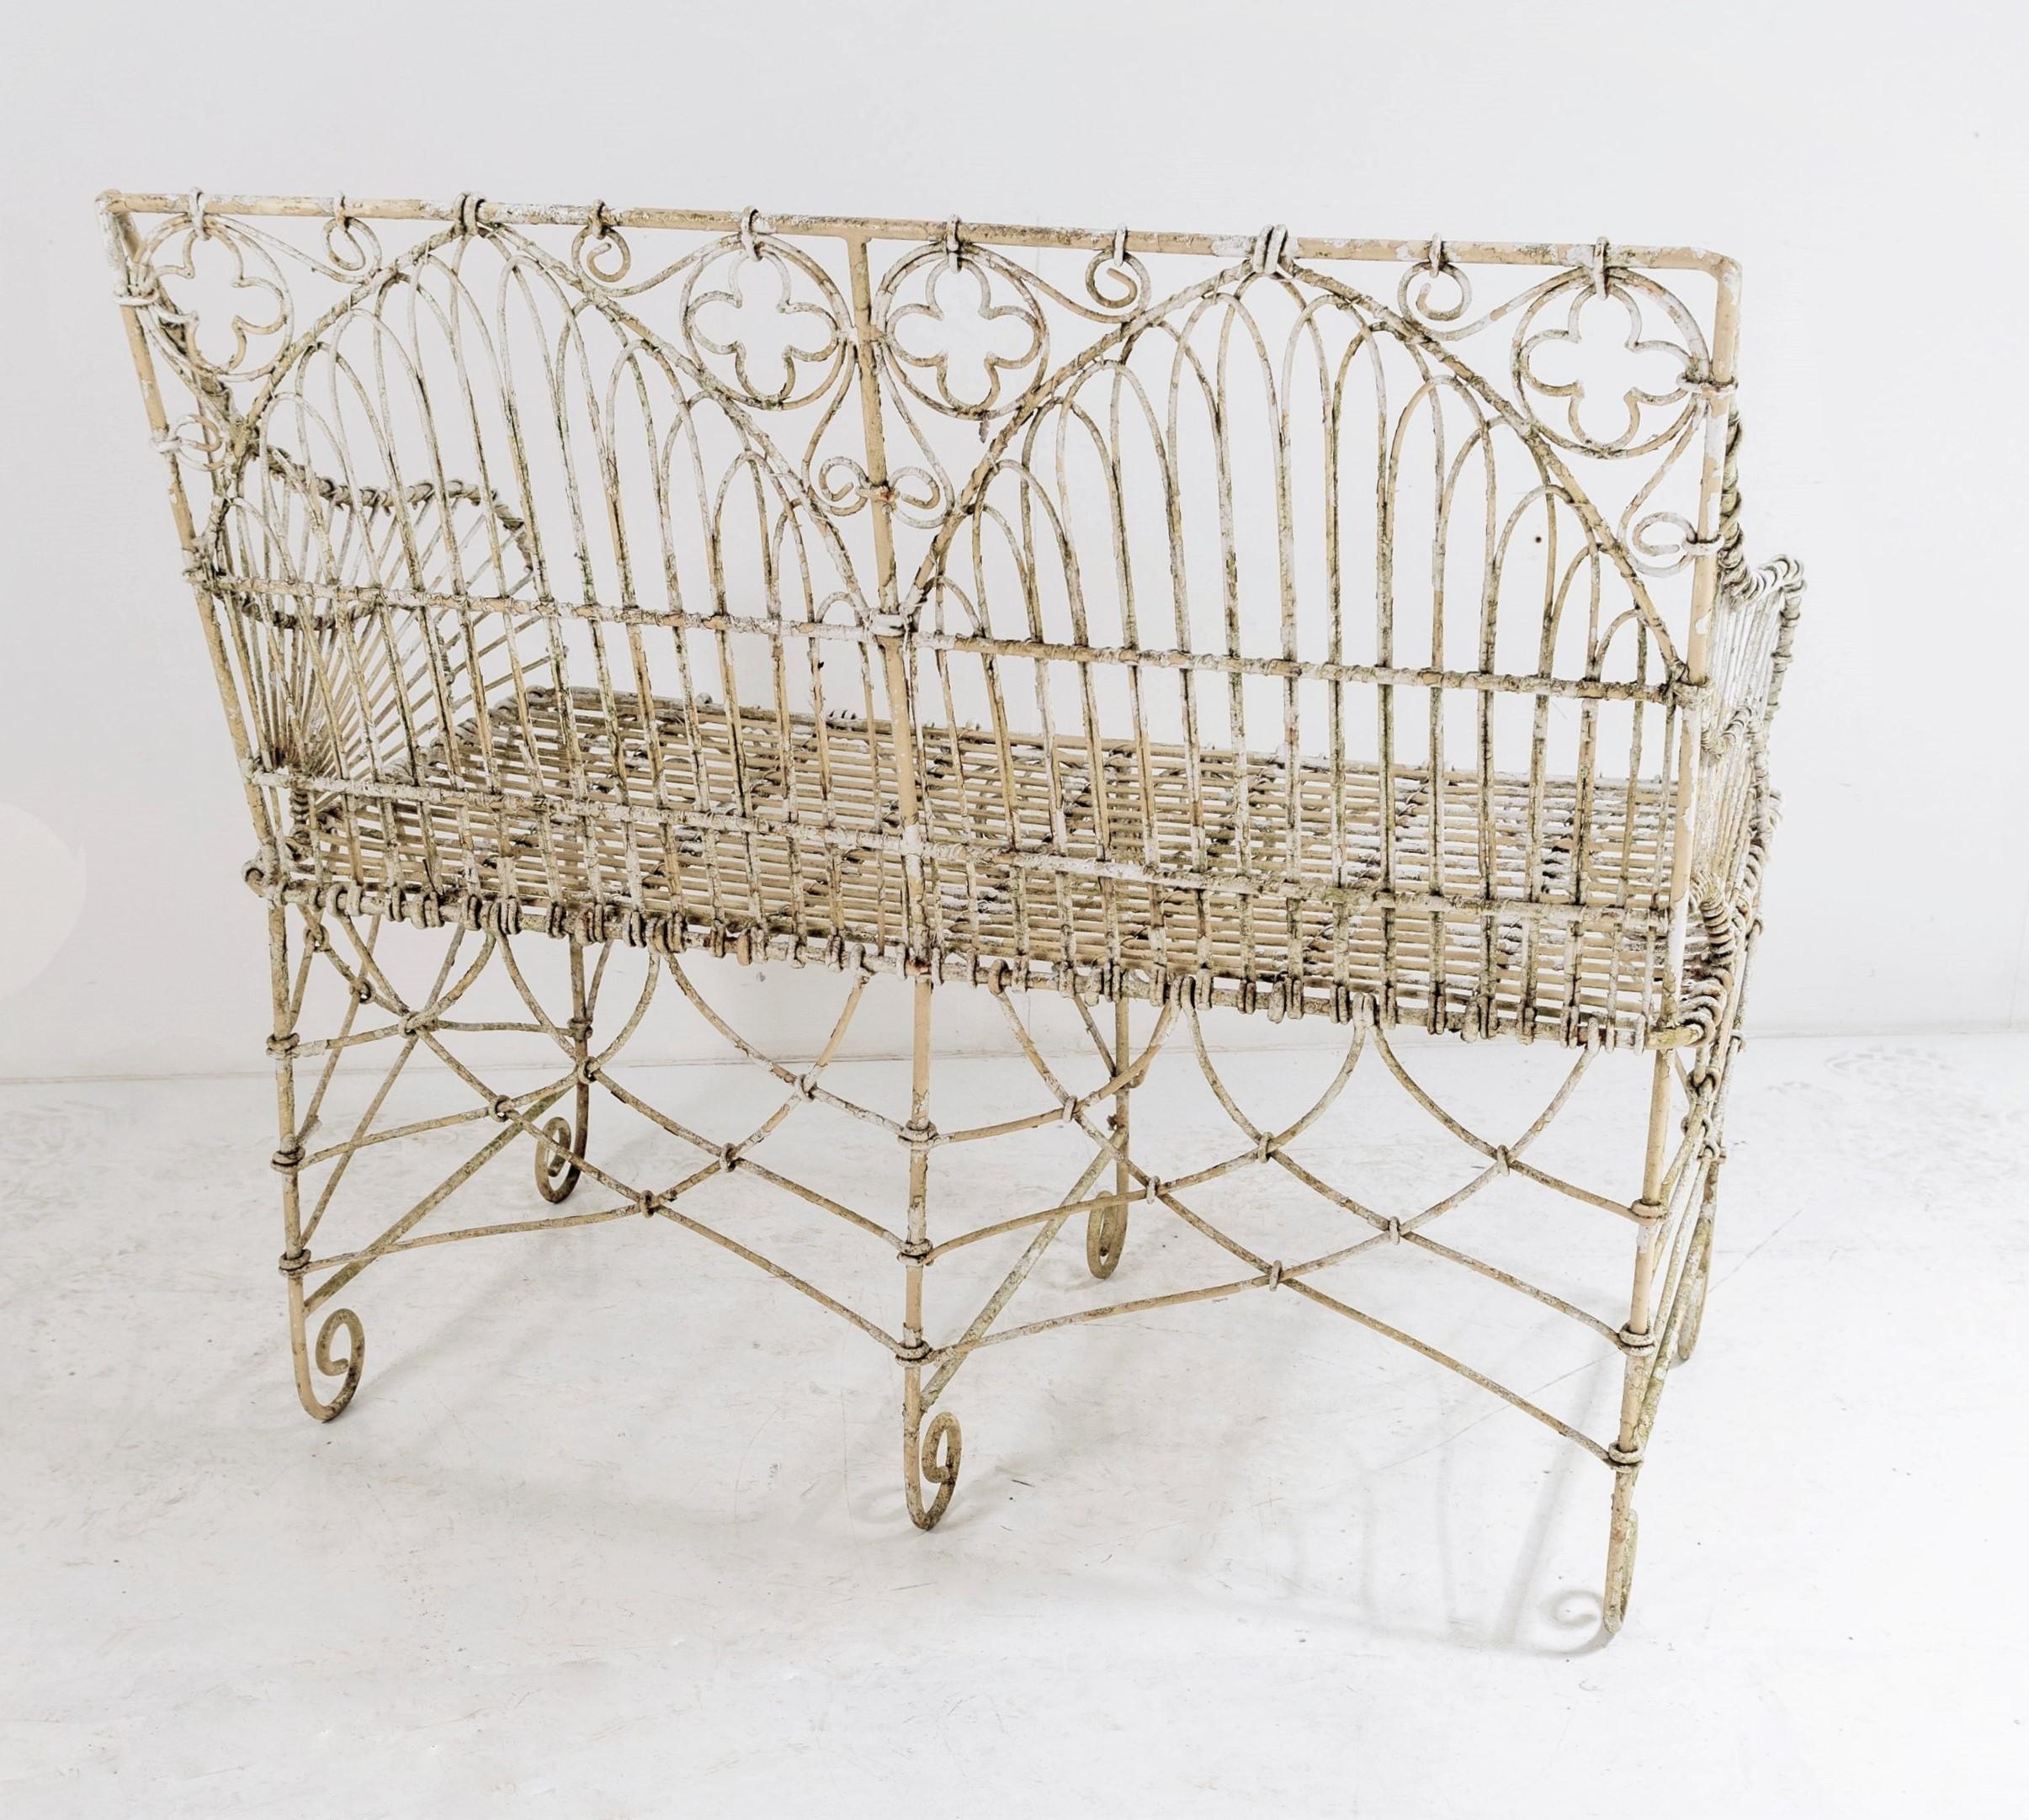 English Garden Bench Wrought Iron Style Wirework Seat with Weathered Patina 2